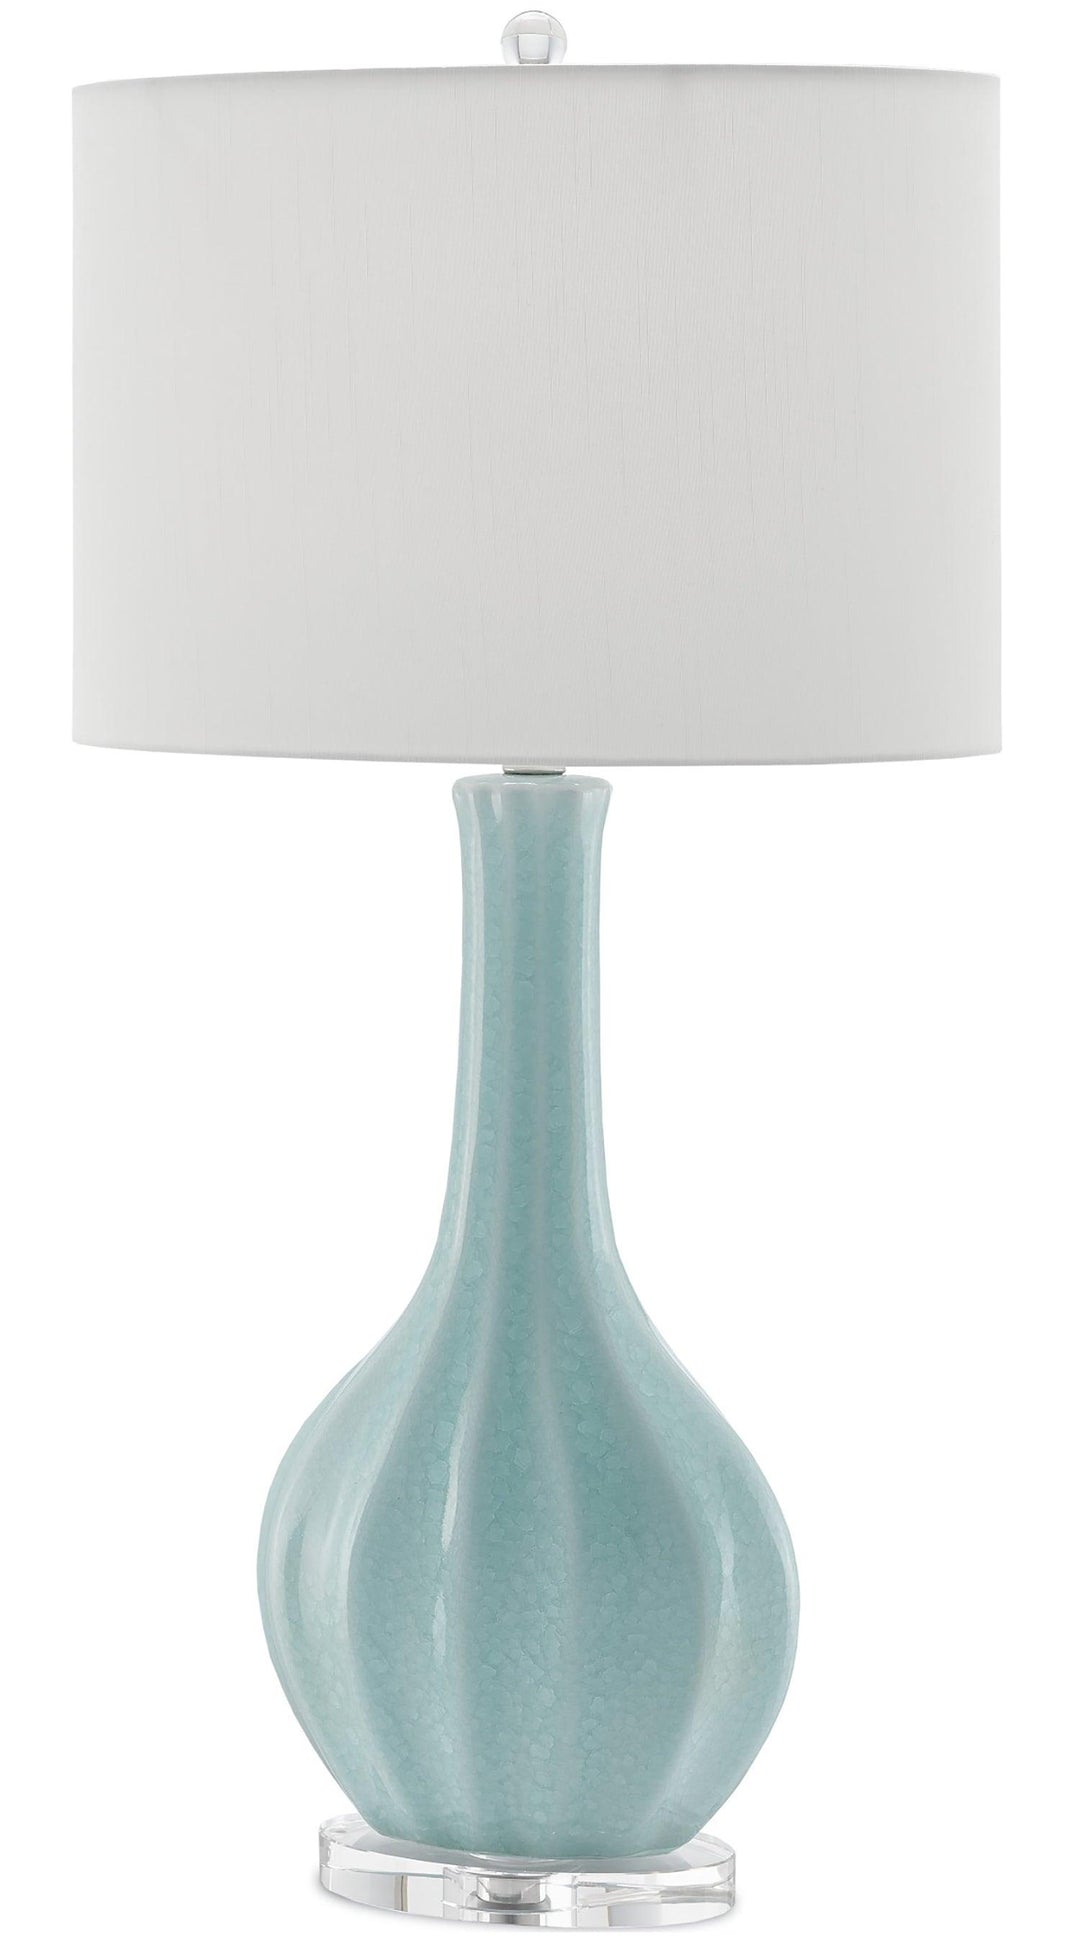 Sionna Table Lamp - Casey & Company